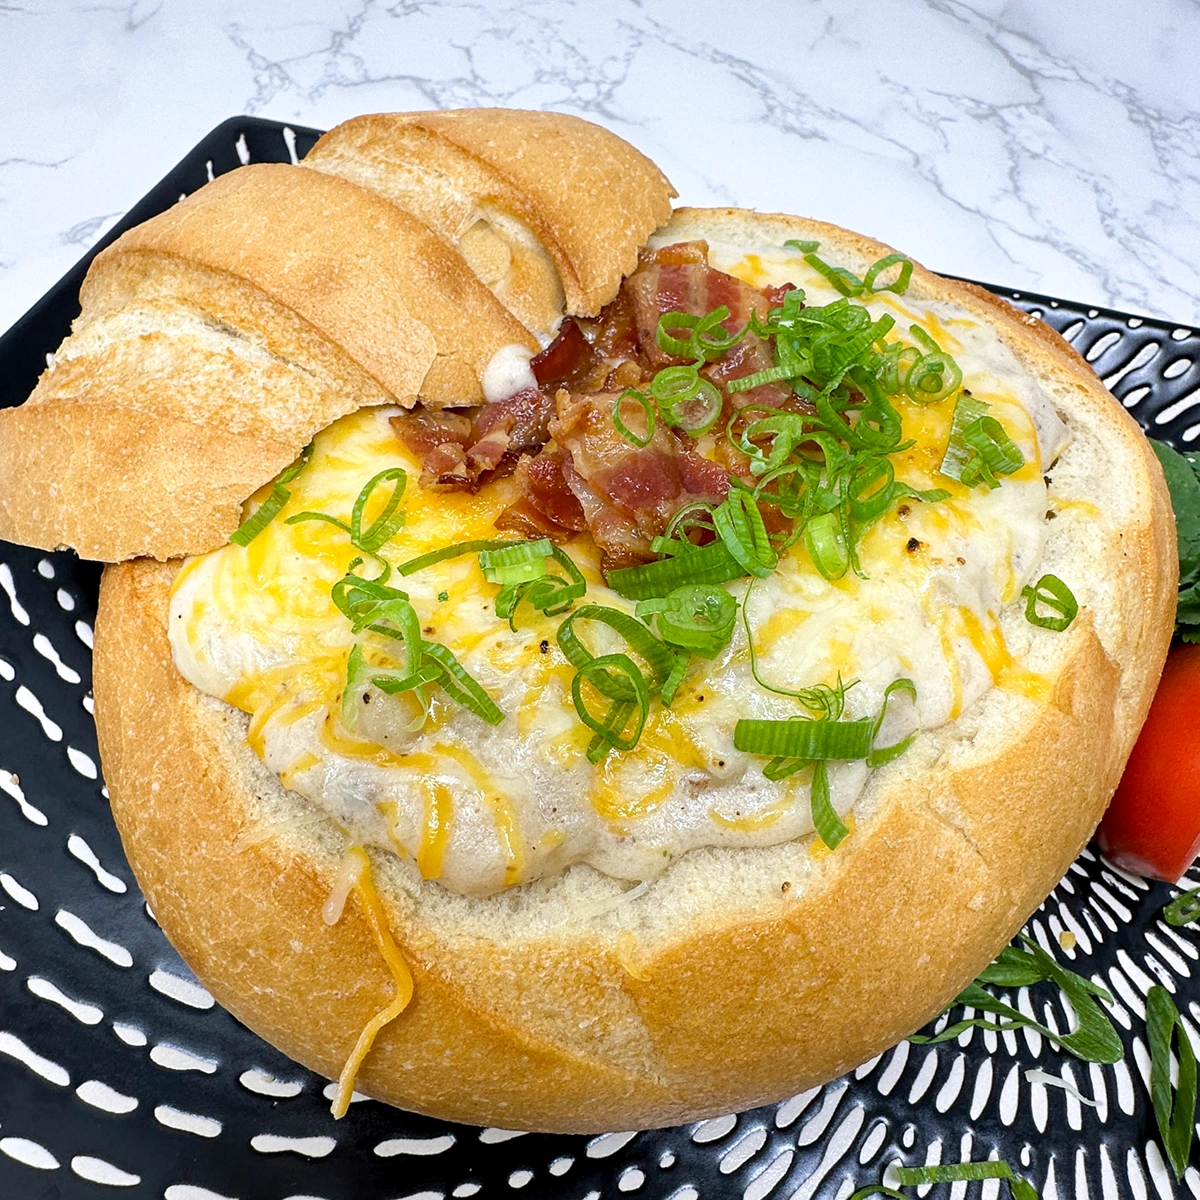 Loaded Baked Potato Soup served in a Bread BowlChicken Cordon Bleu | Chef-Driven School Lunches Students will Love | ChefAdvantage